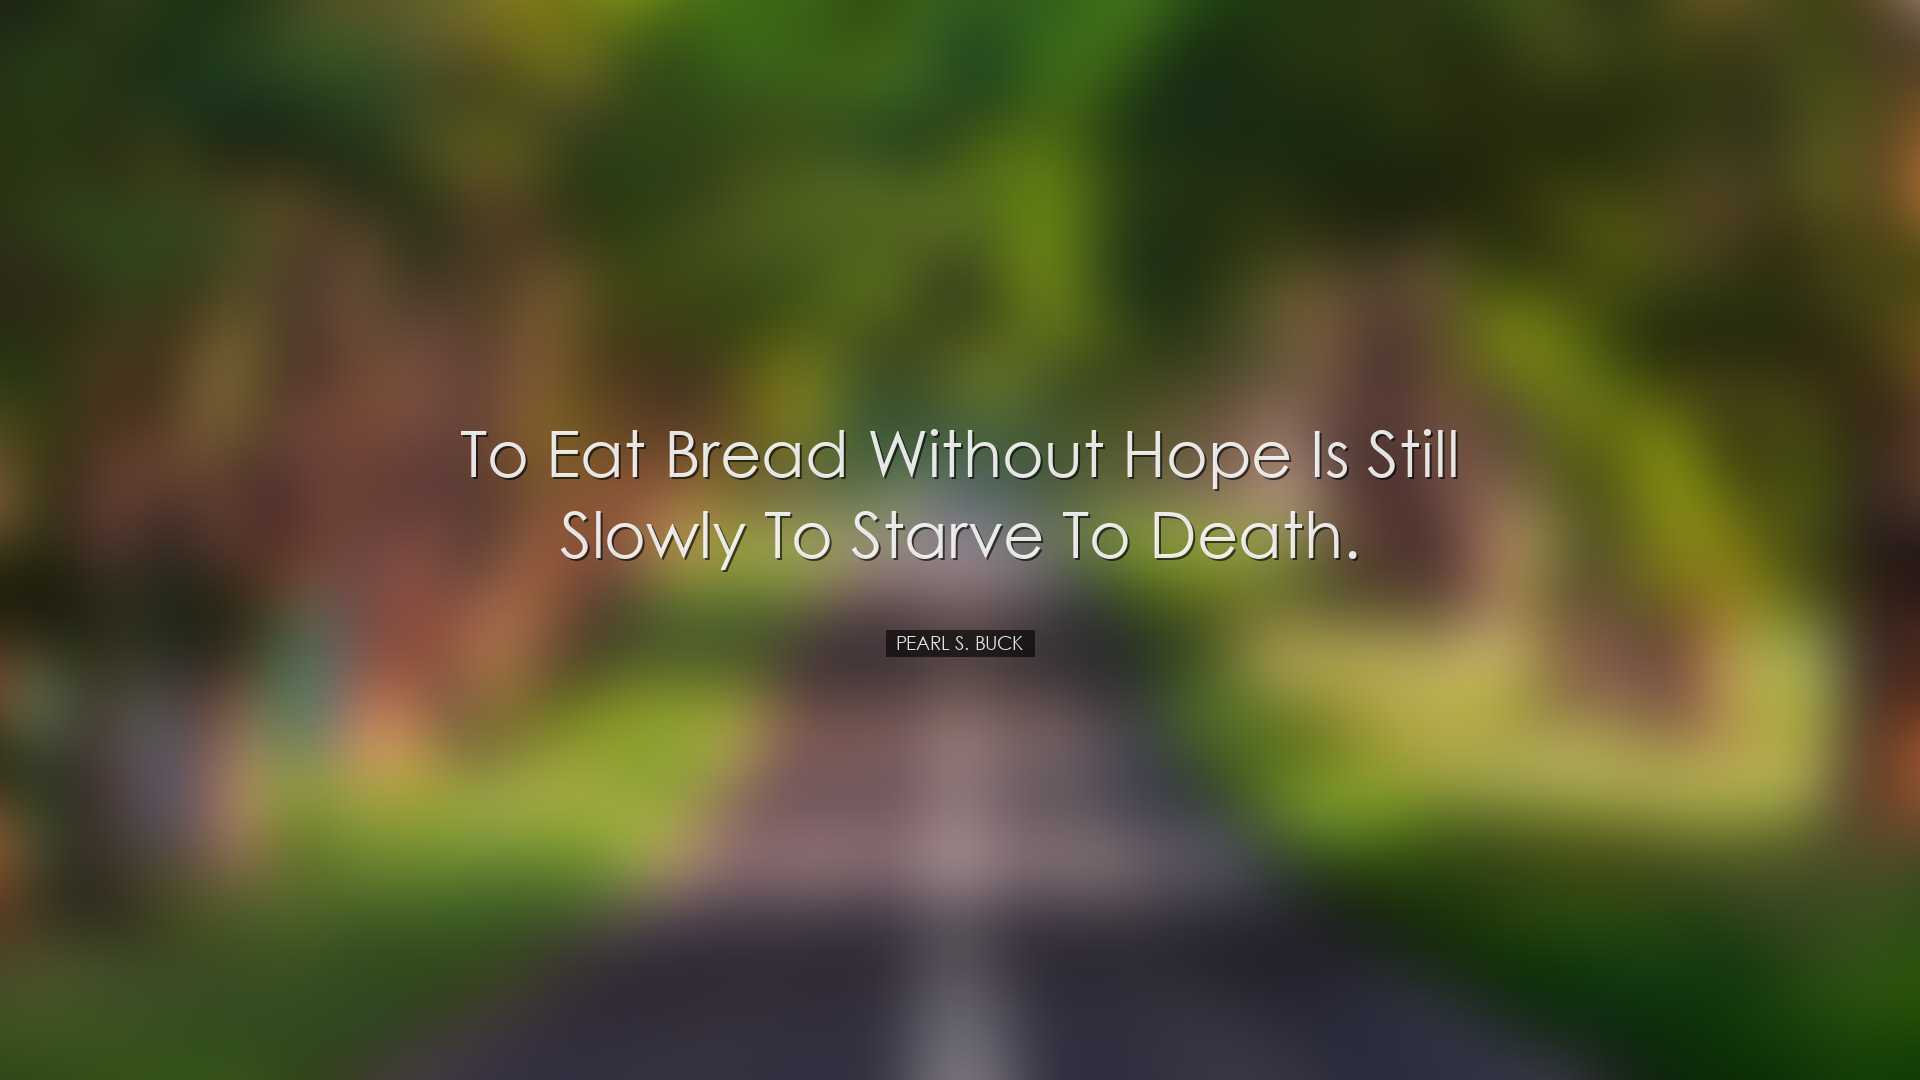 To eat bread without hope is still slowly to starve to death. - Pe